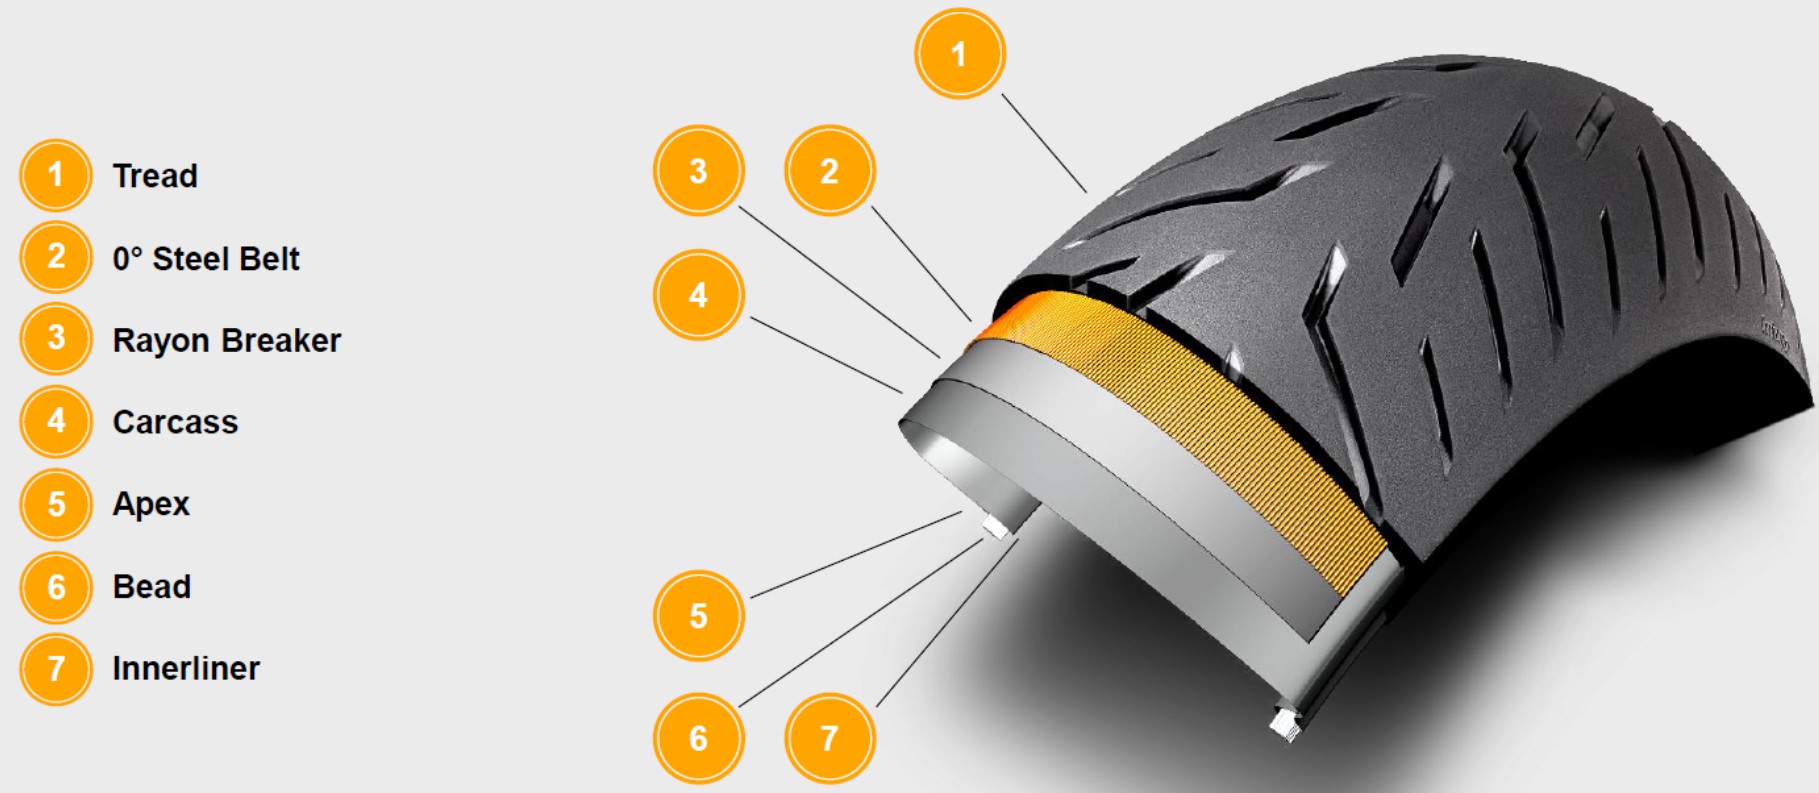 An illustrative depiction of a motorcycle tire highlighting its key components, including the tread, sidewall, bead, shoulder, carcass (plies), belt package, and inner liner.